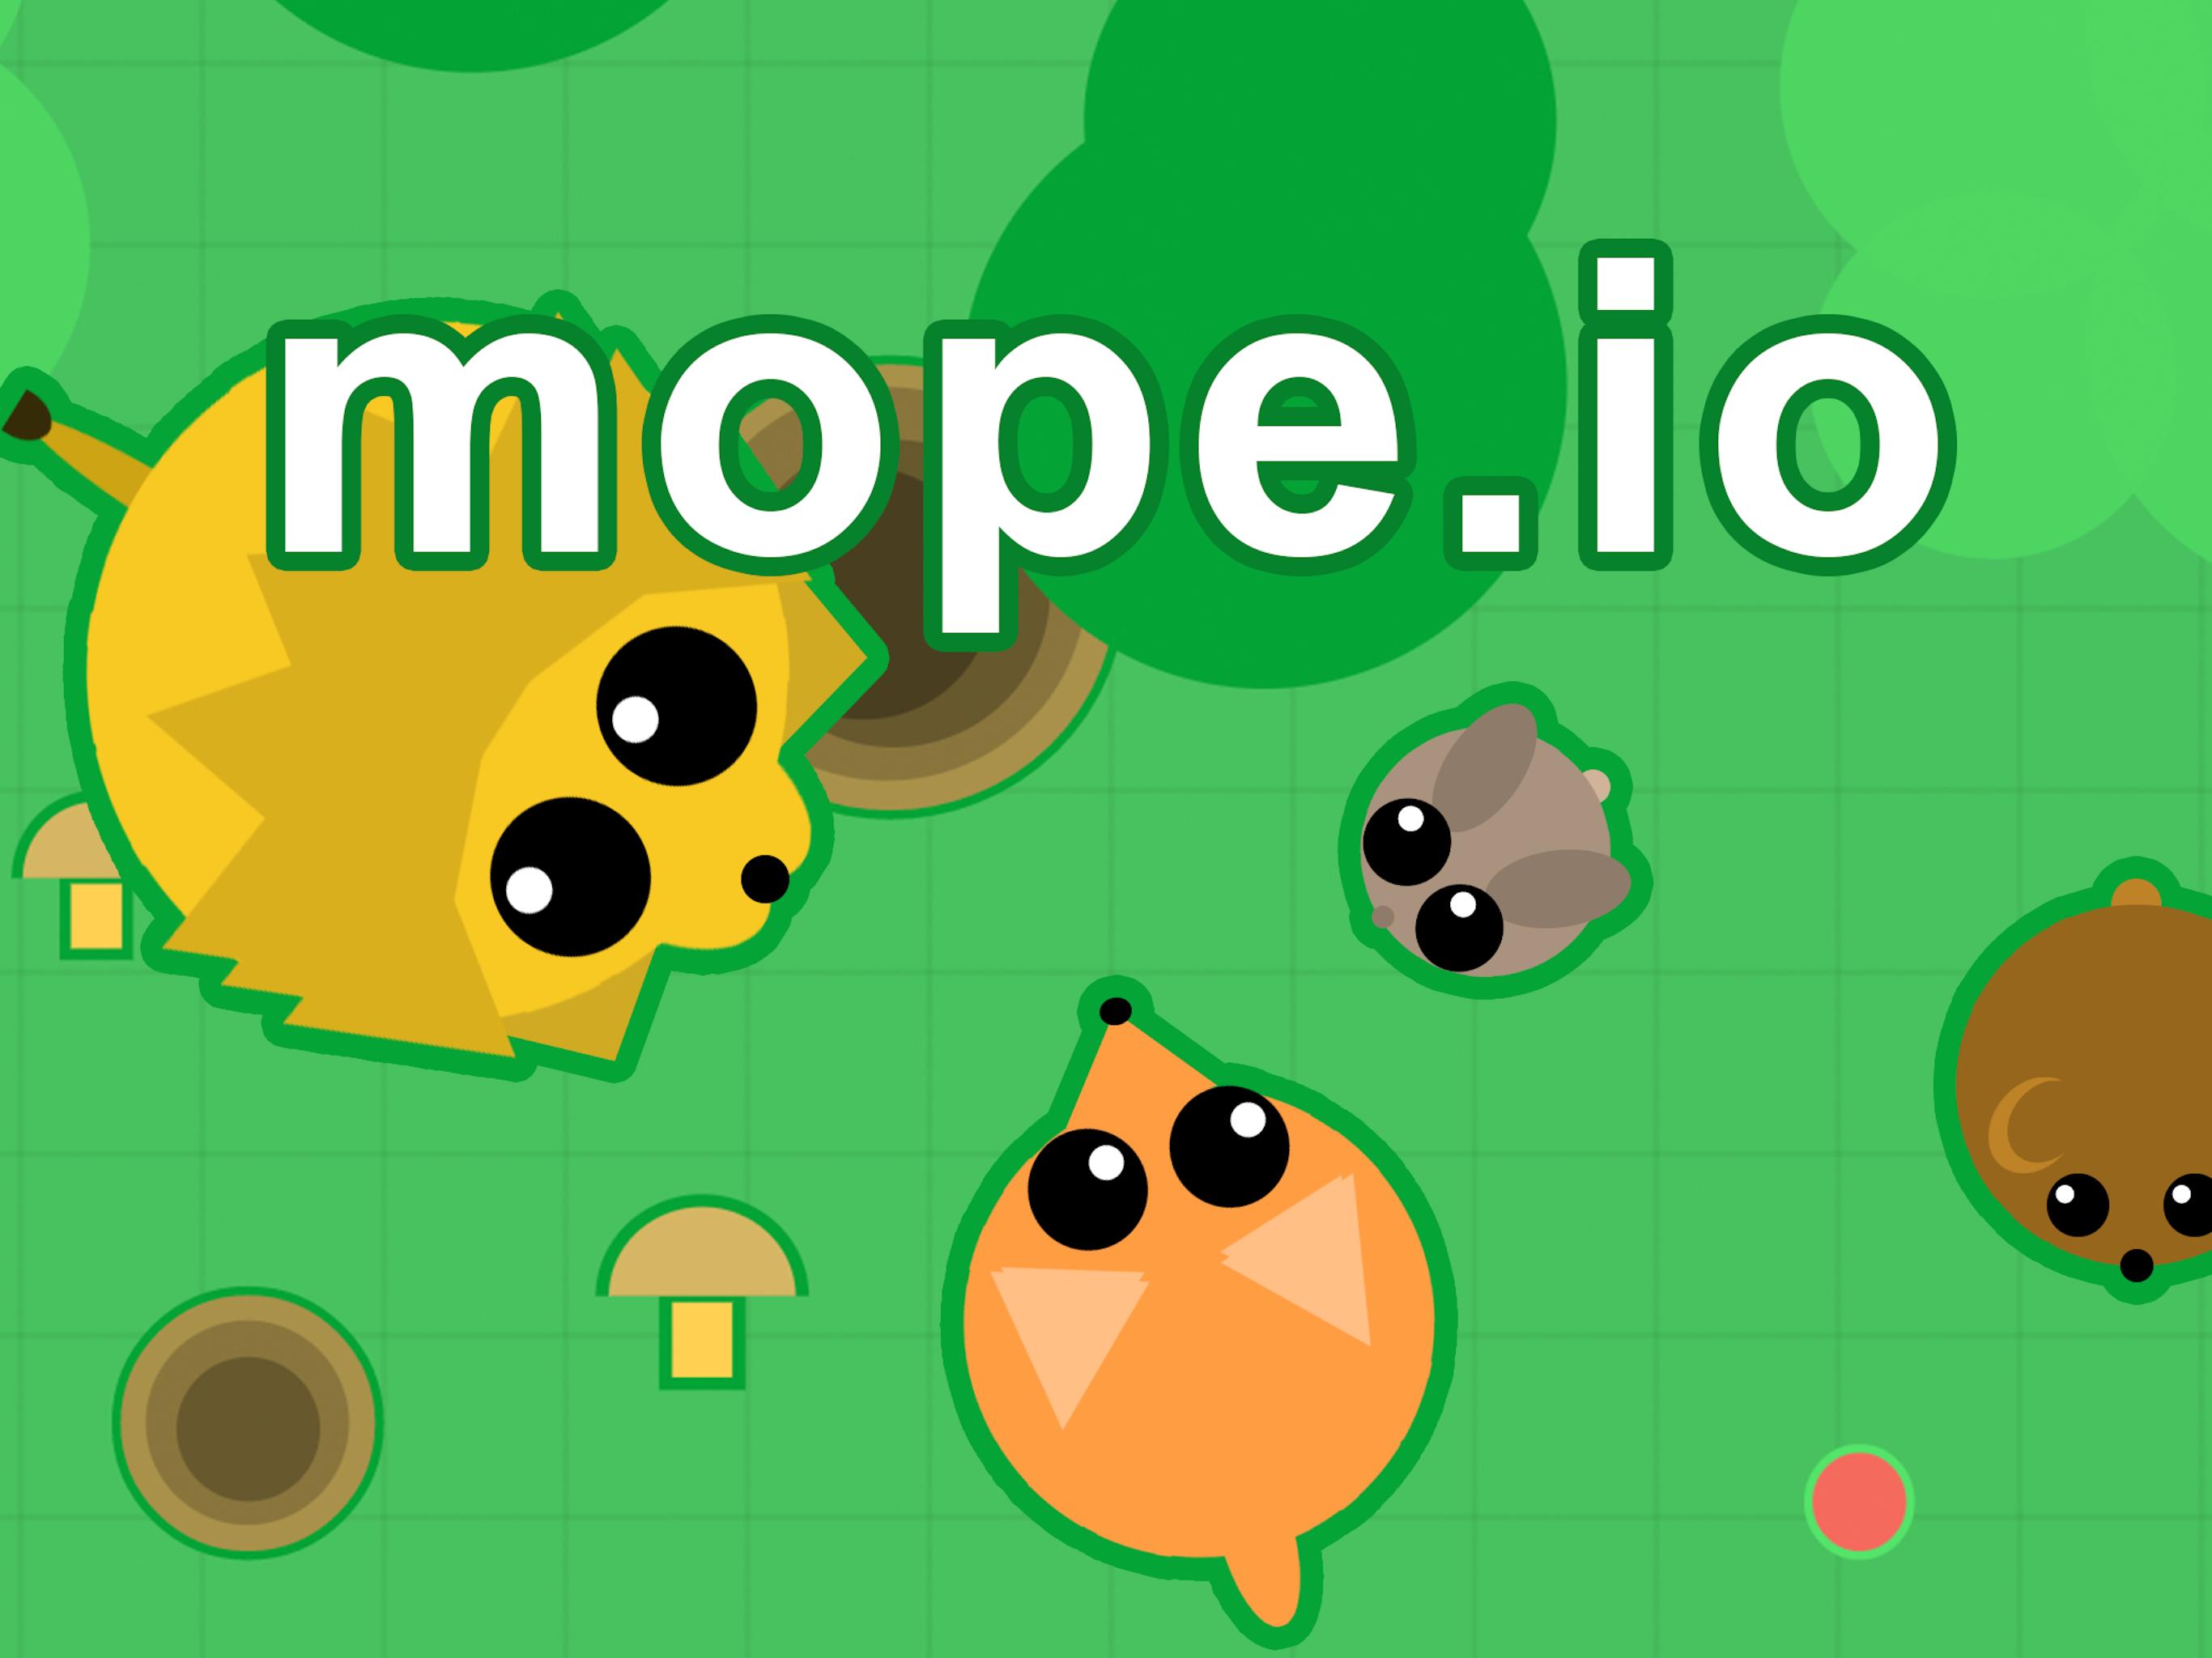 mope.io for Android - APK Download